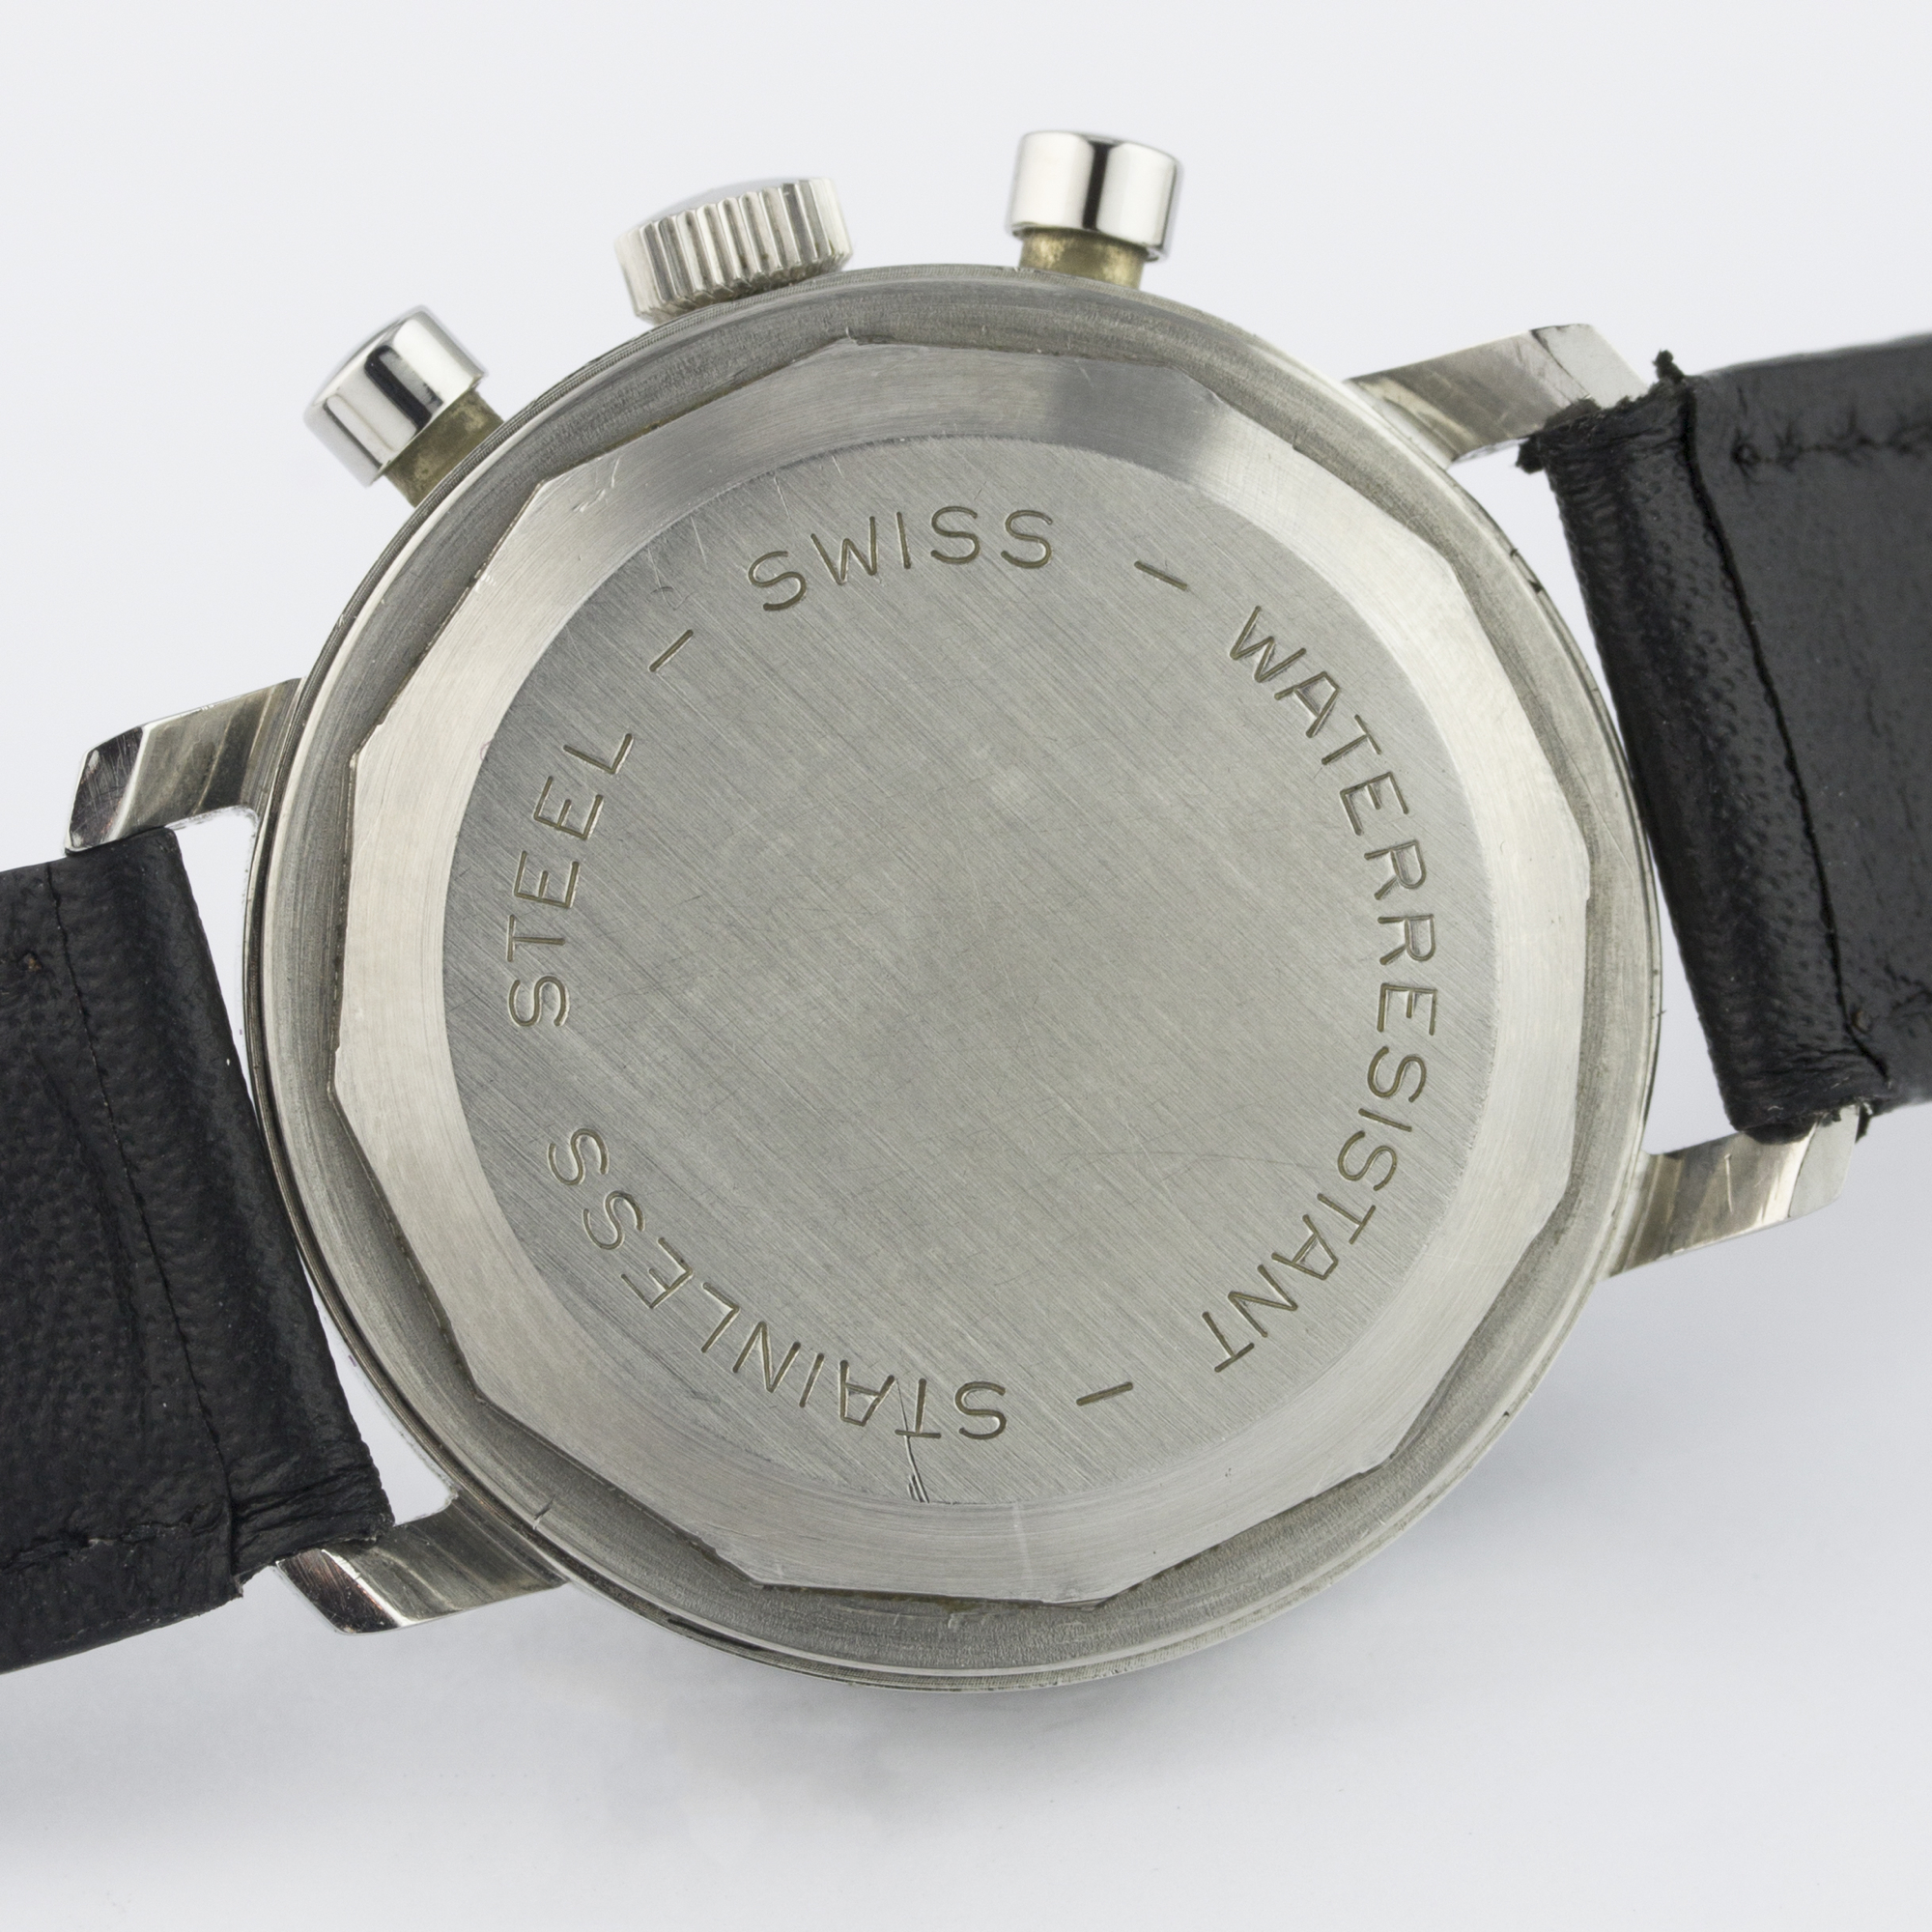 A GENTLEMAN’S STAINLESS STEEL VANTAGE CHRONOGRAPH WRIST WATCH CIRCA 1970 D: Black dial with luminous - Image 5 of 7